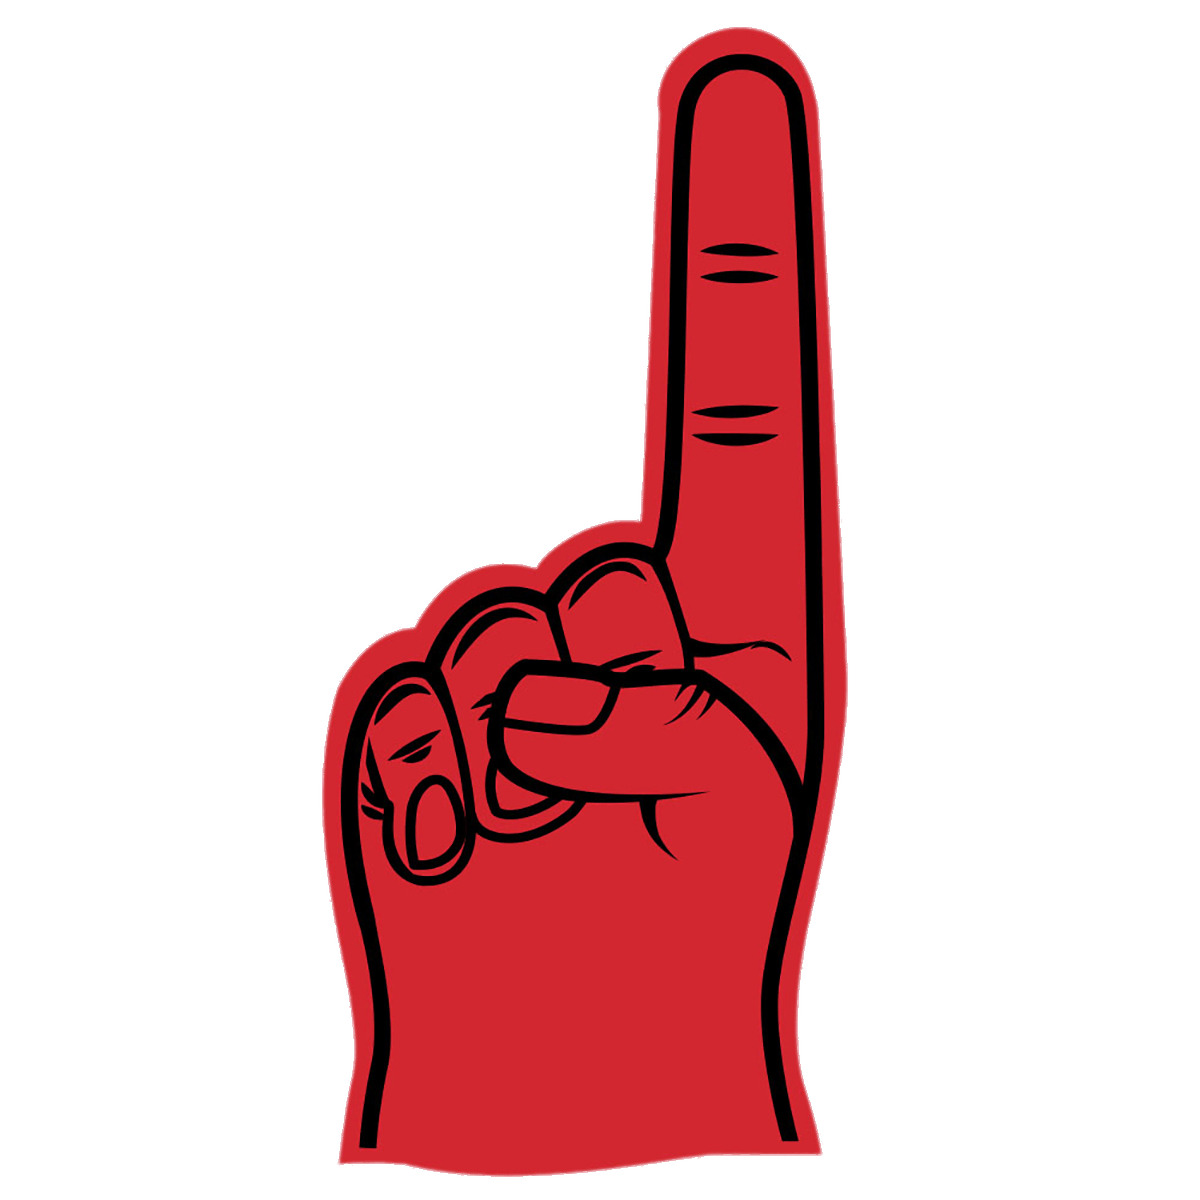 Red Foam Hand Index Up icons